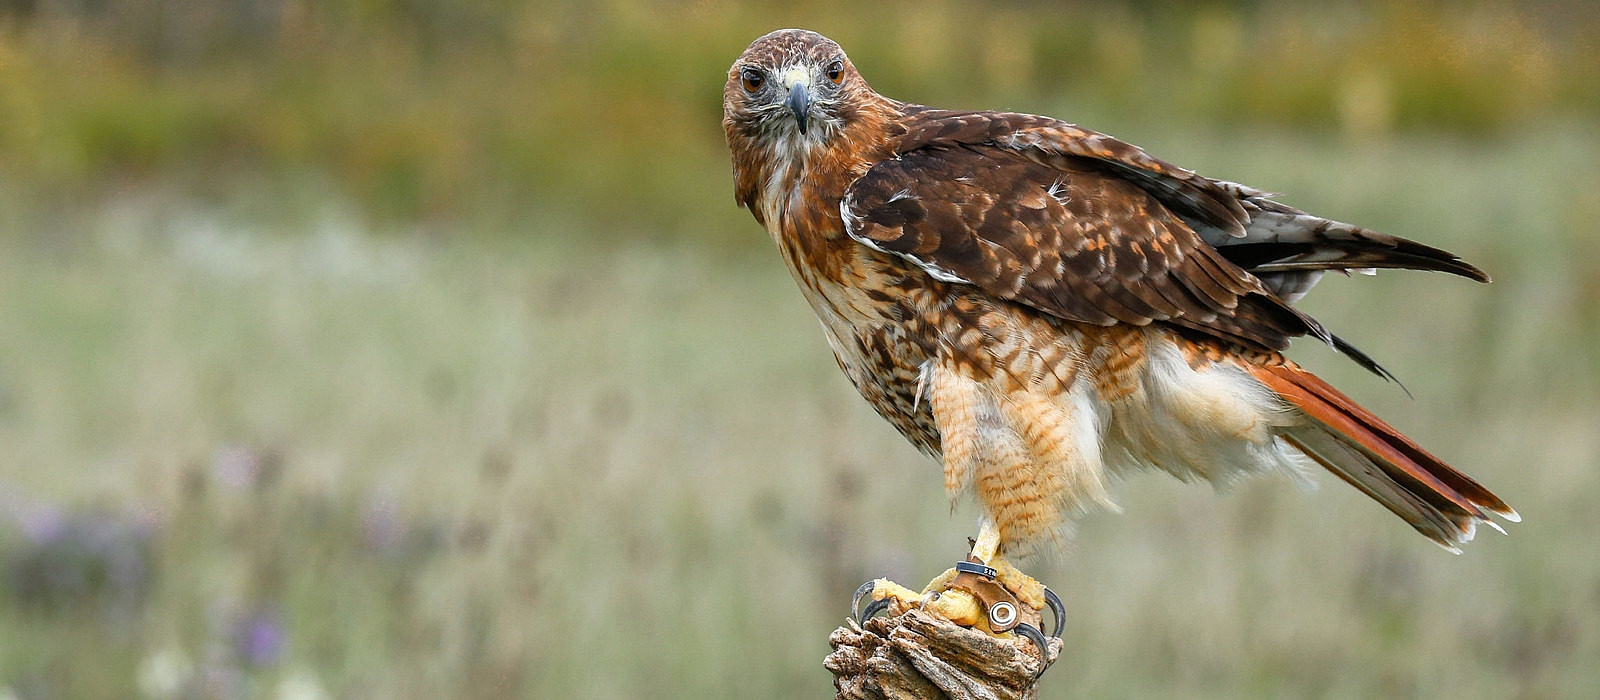 A Red-tailed Hawk perched on a post. (photo © Stephane Tardif via the Flickr Creative Commons)